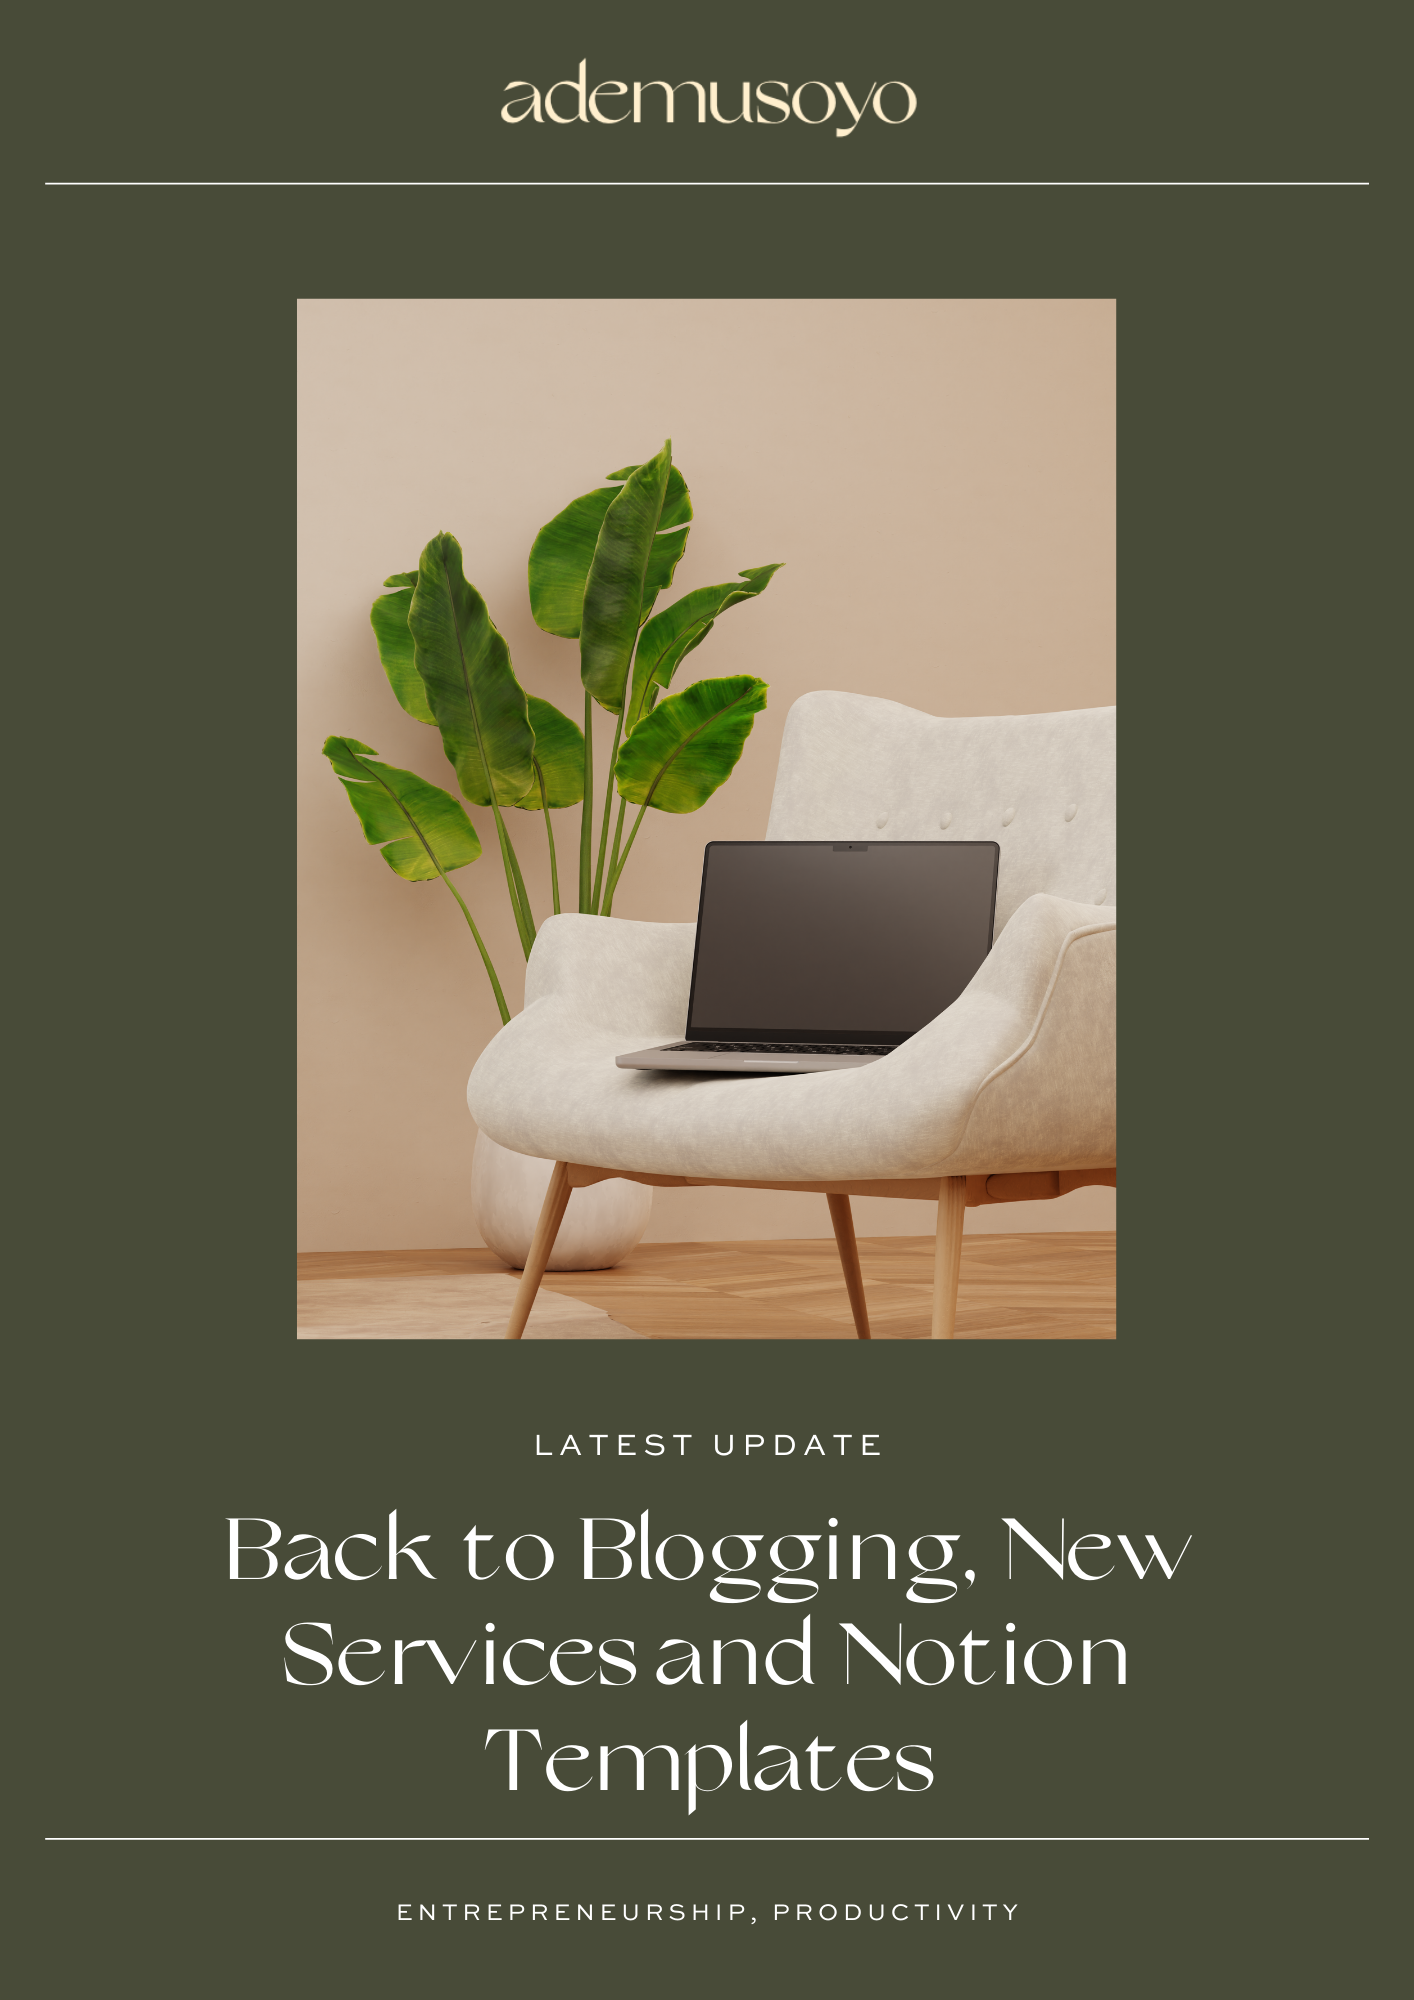 Back to Blogging, New Notion Templates and Services